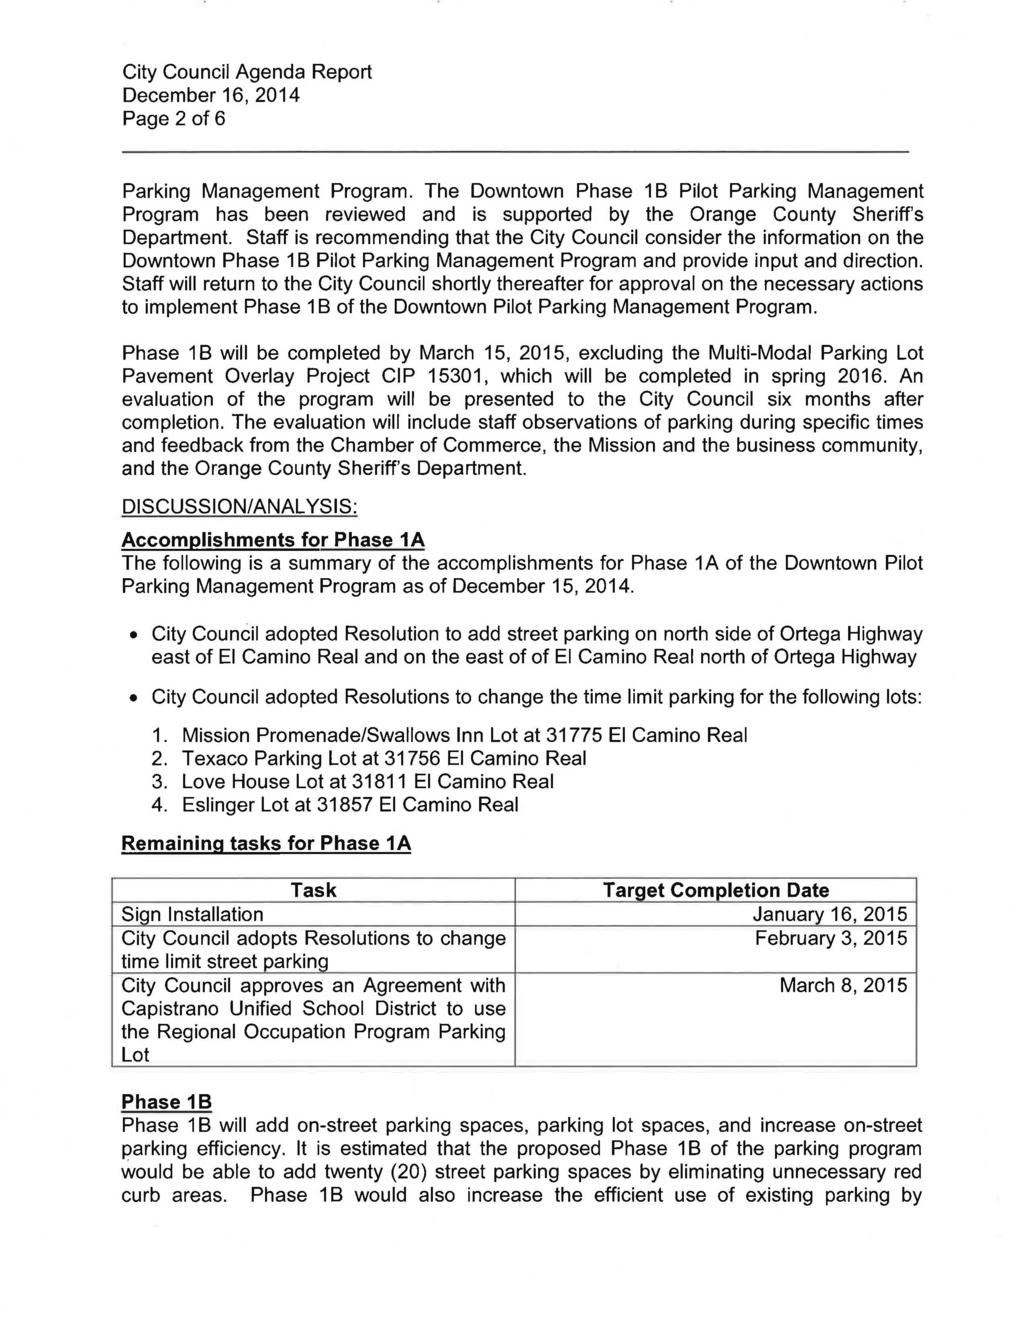 City Council Agenda Report Page 2 of 6 Parking Management Program. The Downtown Phase 1 B Pilot Parking Management Program has been reviewed and is supported by the Orange County Sheriff's Department.